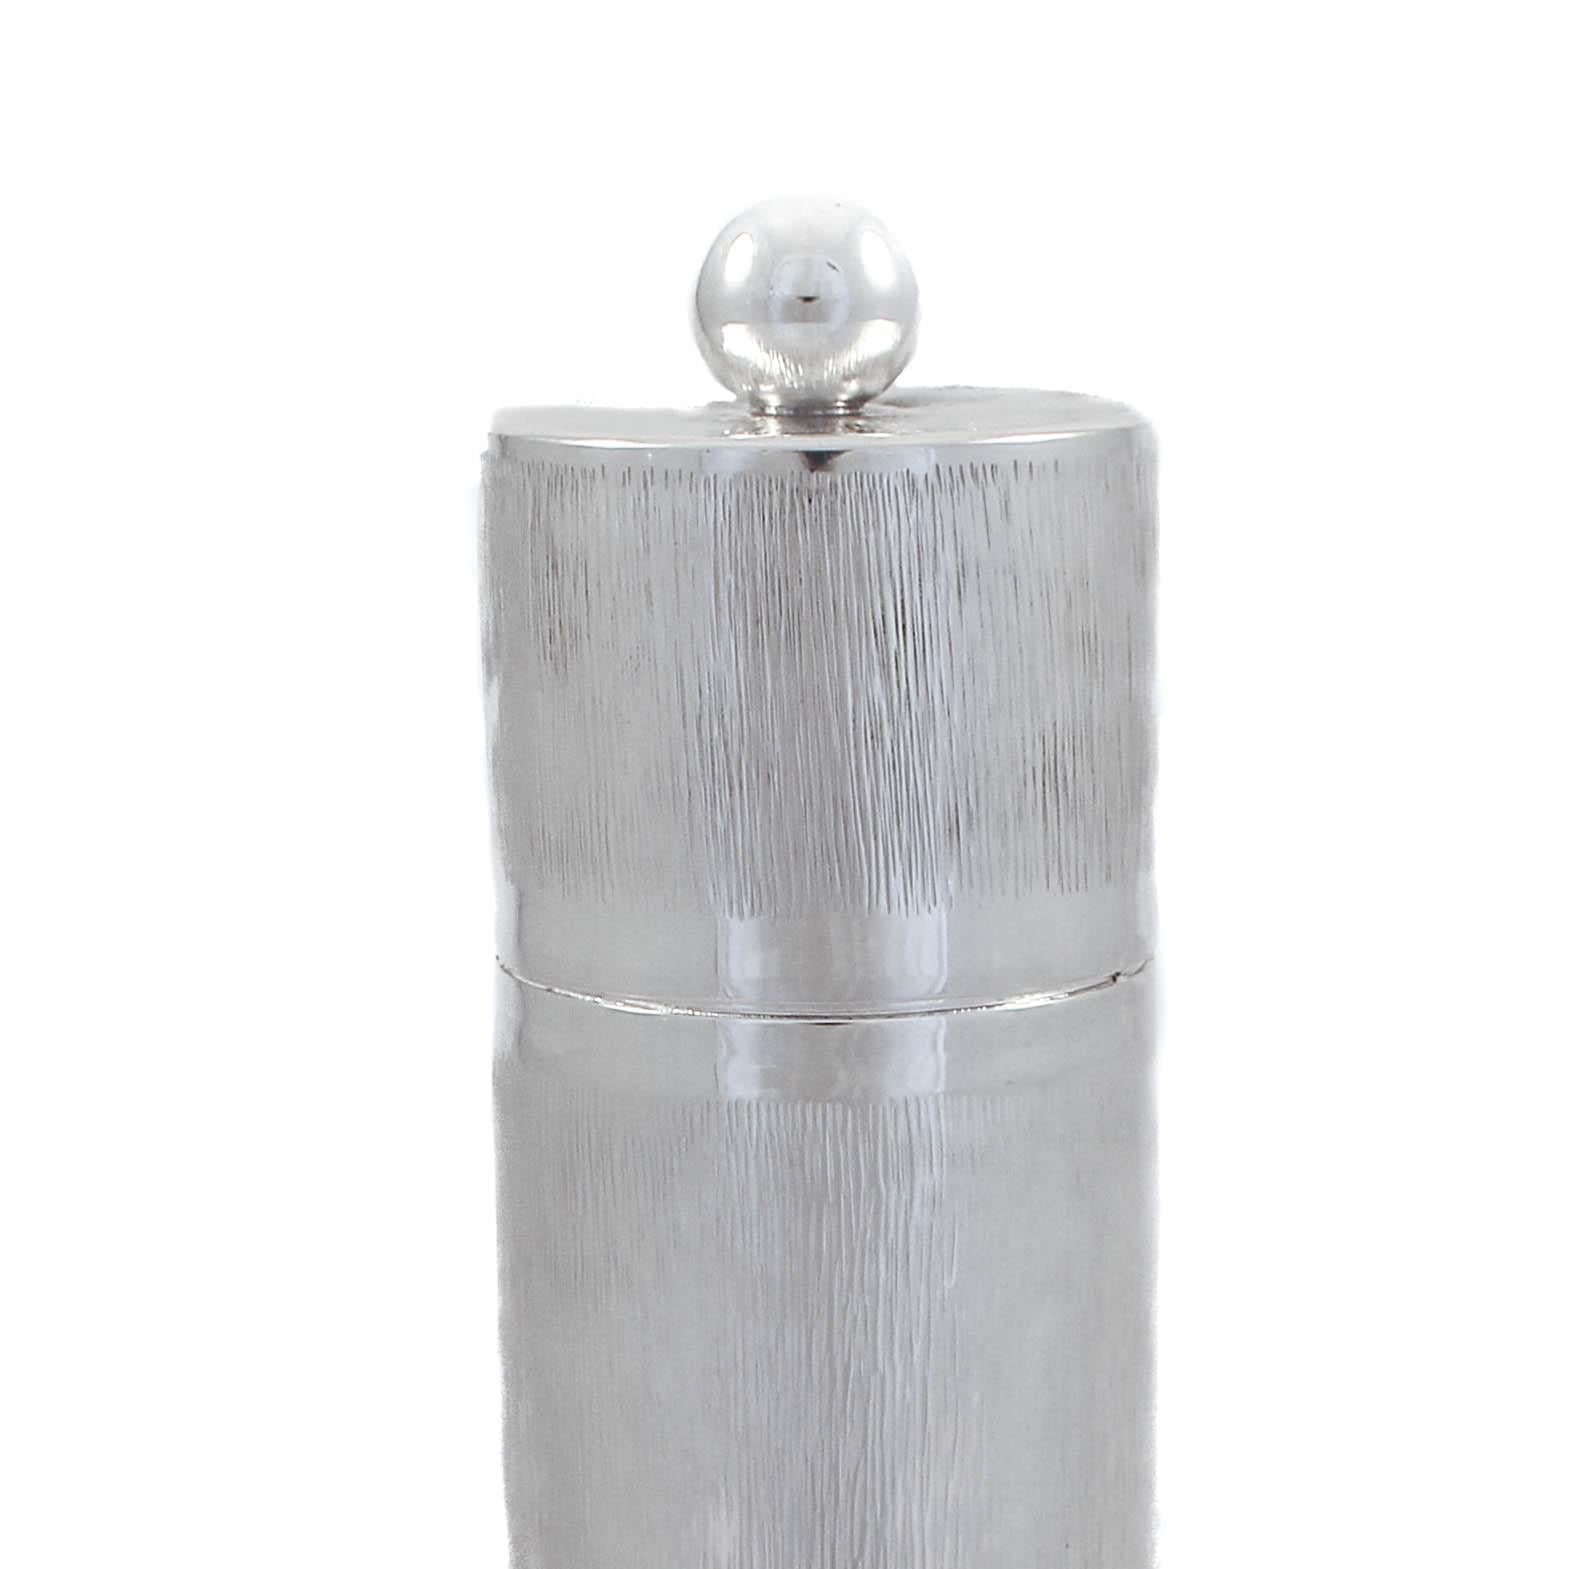 Proudly offering a sterling silver Megillah case. It’s not often we get excited by Judaica but this piece is very special. 
A Megillah is the scroll that tells the story of Esther and how she saved her people (Jews) from annihilation. The story is